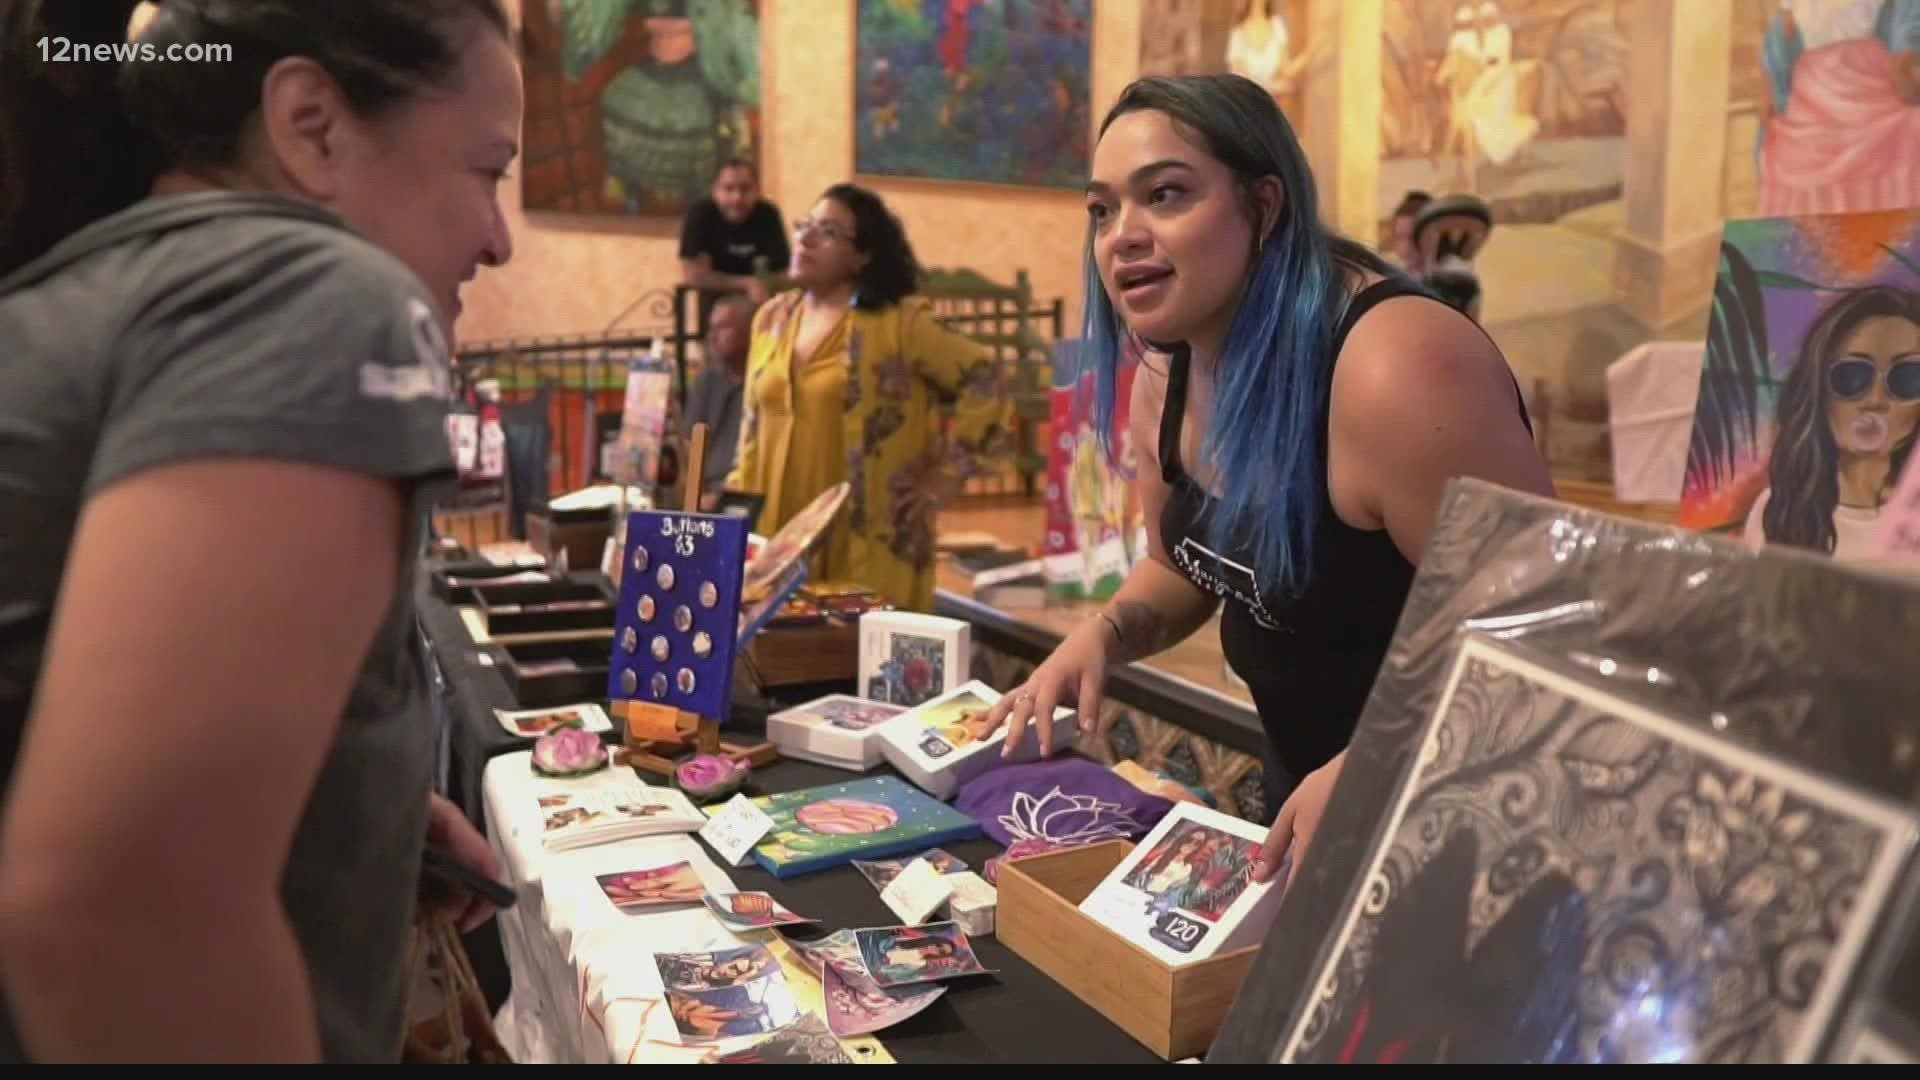 Mujeres Mercado hosts more than 50 Latina-run businesses, offering everything from artwork, handmade soaps, jewelry, food and more.